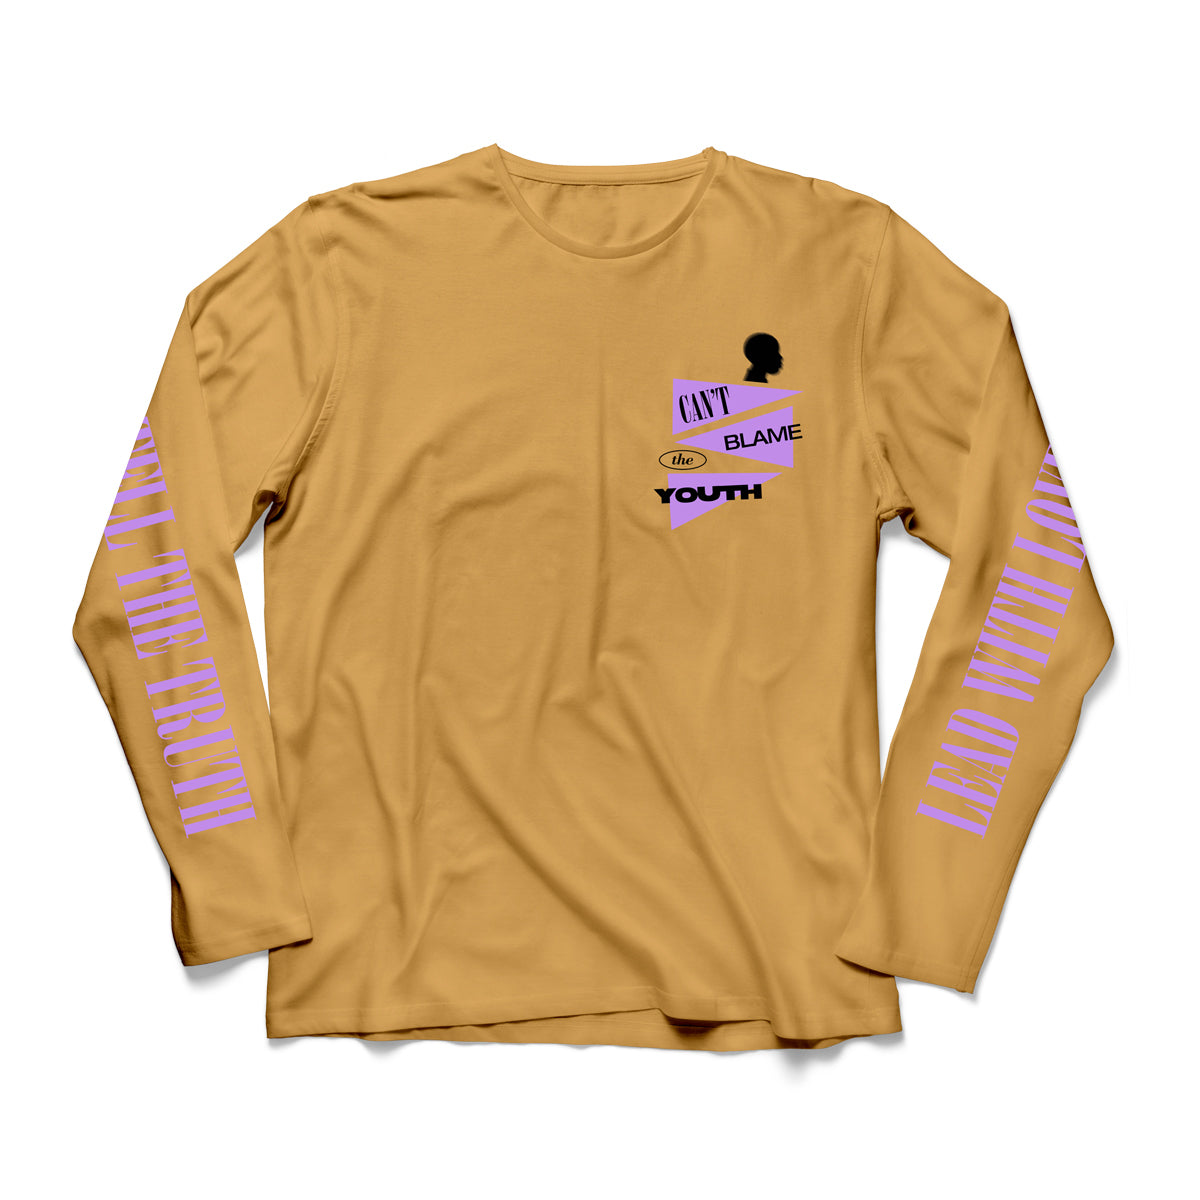 Cant Blame the Youth: Long Sleeve